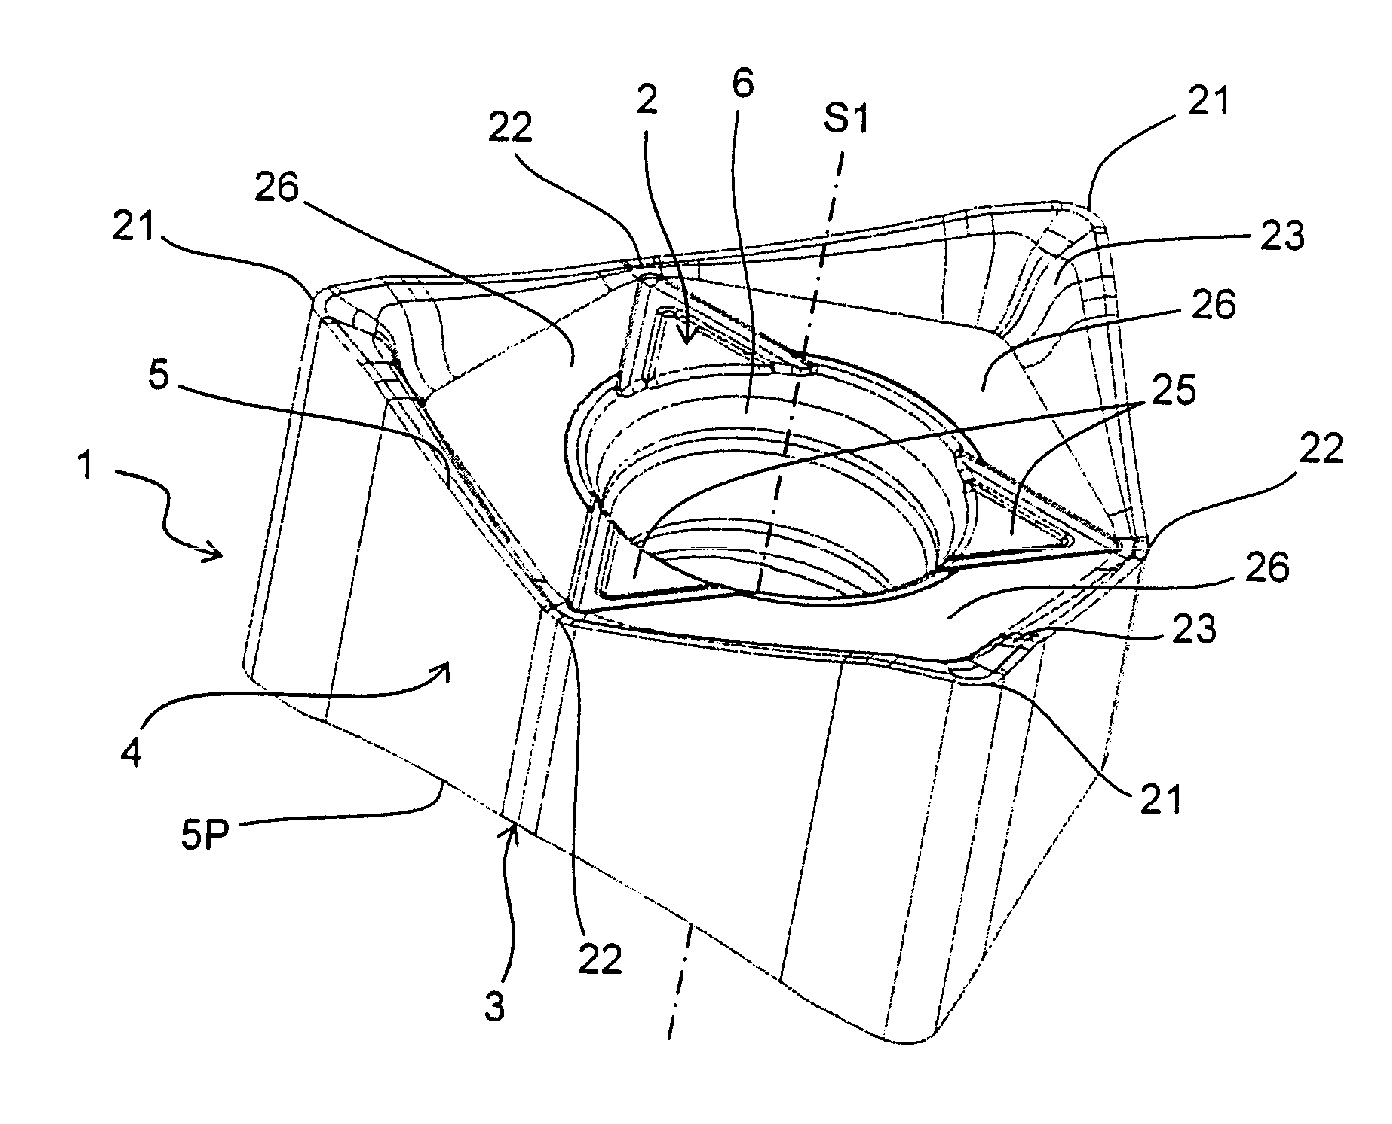 Cutting insert, cutting tool, and method of manufacturing machined product using the same